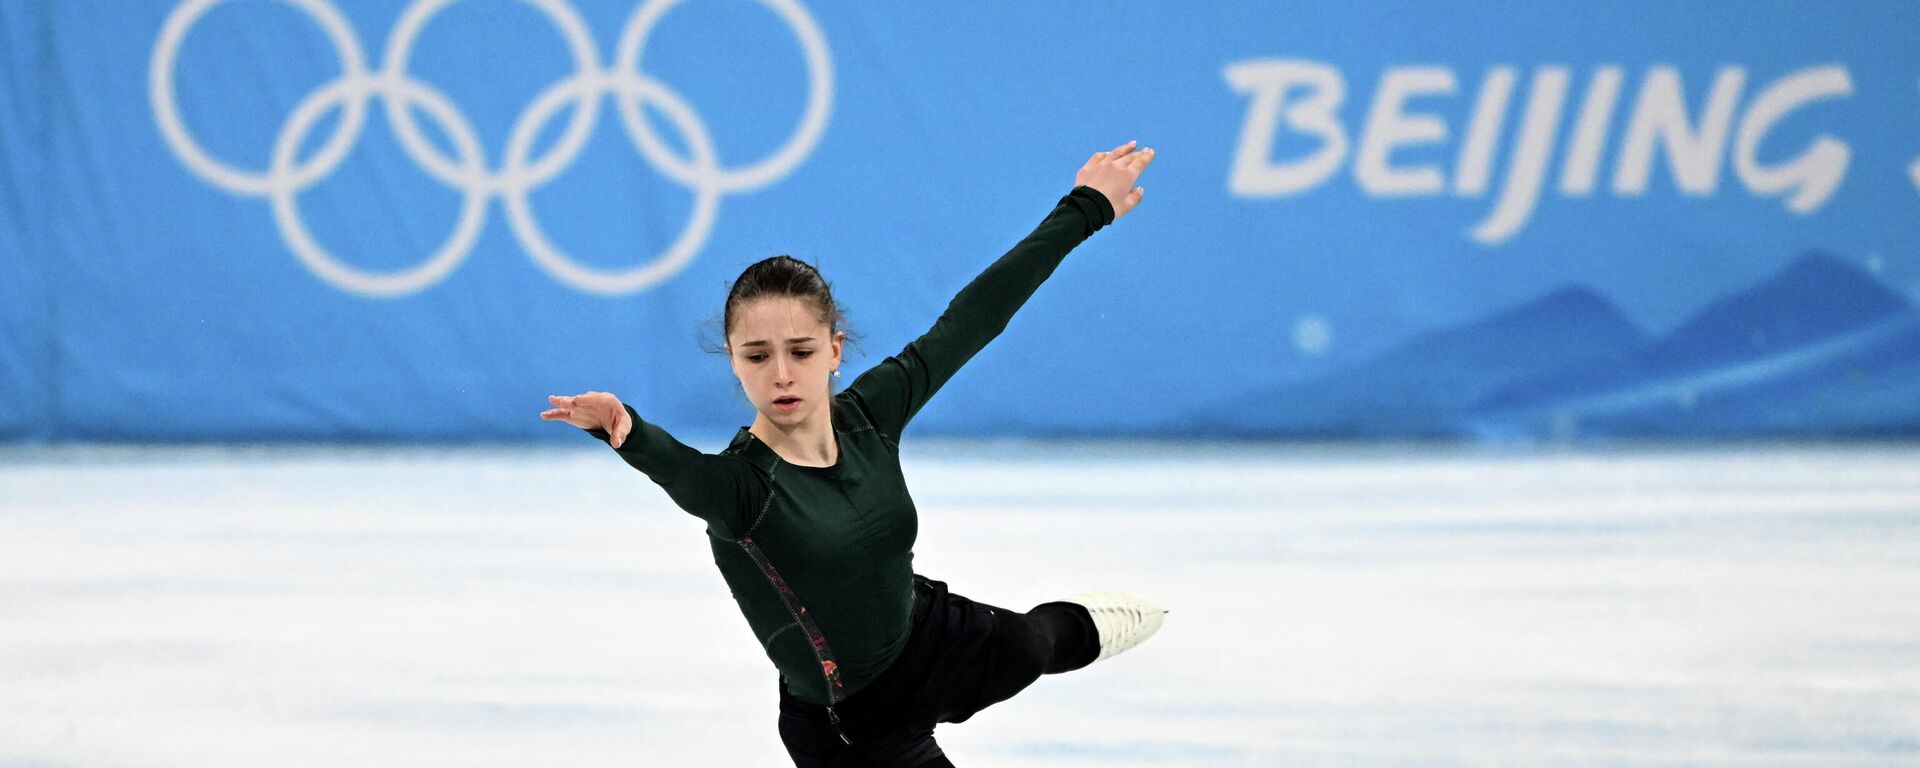 Russia's Kamila Valieva attends a training session on 11 February 2022 prior a figure skating event at the Beijing 2022 Olympic Games.  - Sputnik International, 1920, 11.02.2022